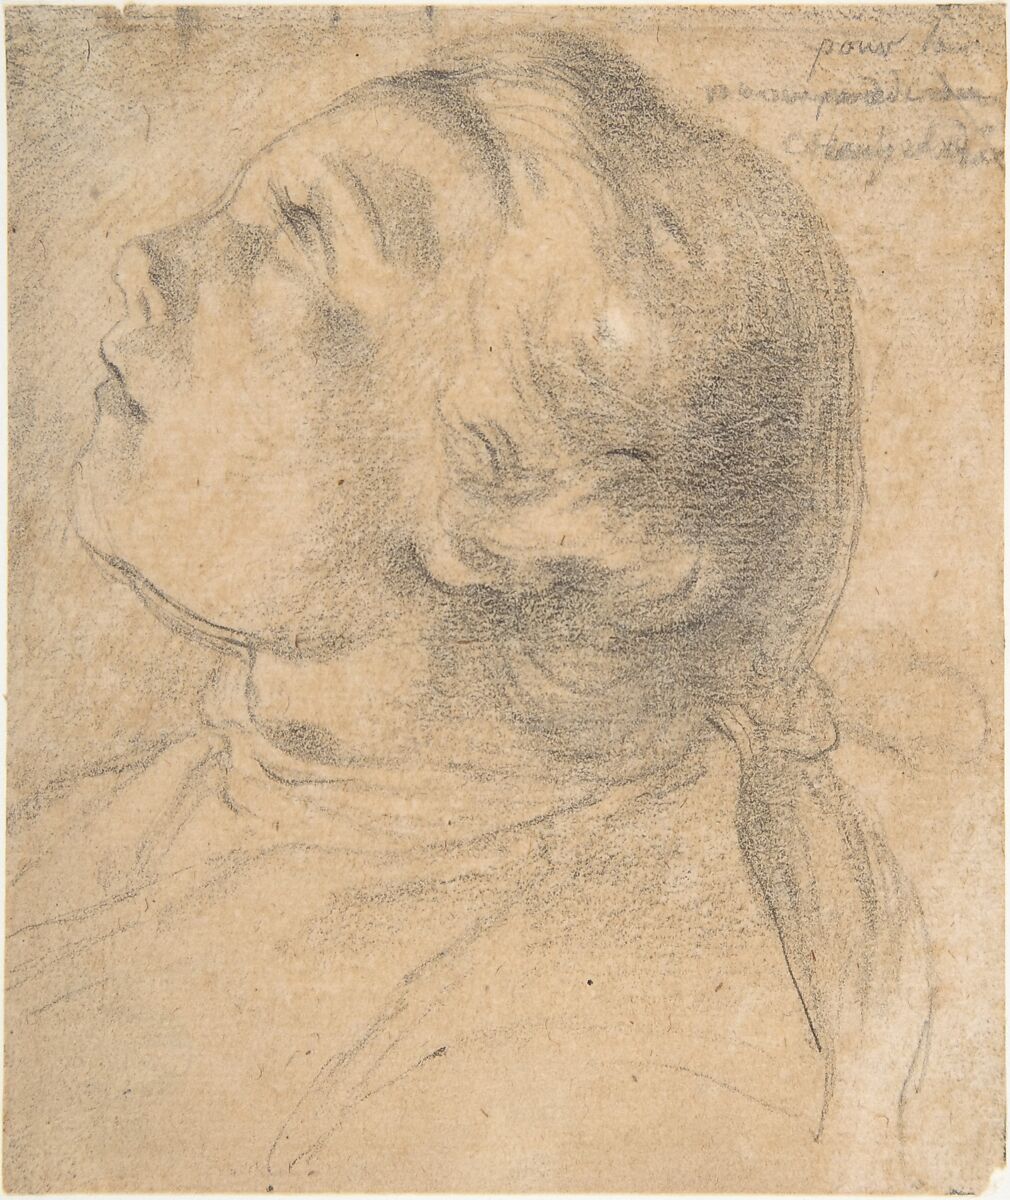 The Upturned Head of a Young Boy in Profile, Attributed to Gabriel de Saint-Aubin (French, Paris 1724–1780 Paris), Black chalk, heightened with white on gray paper 